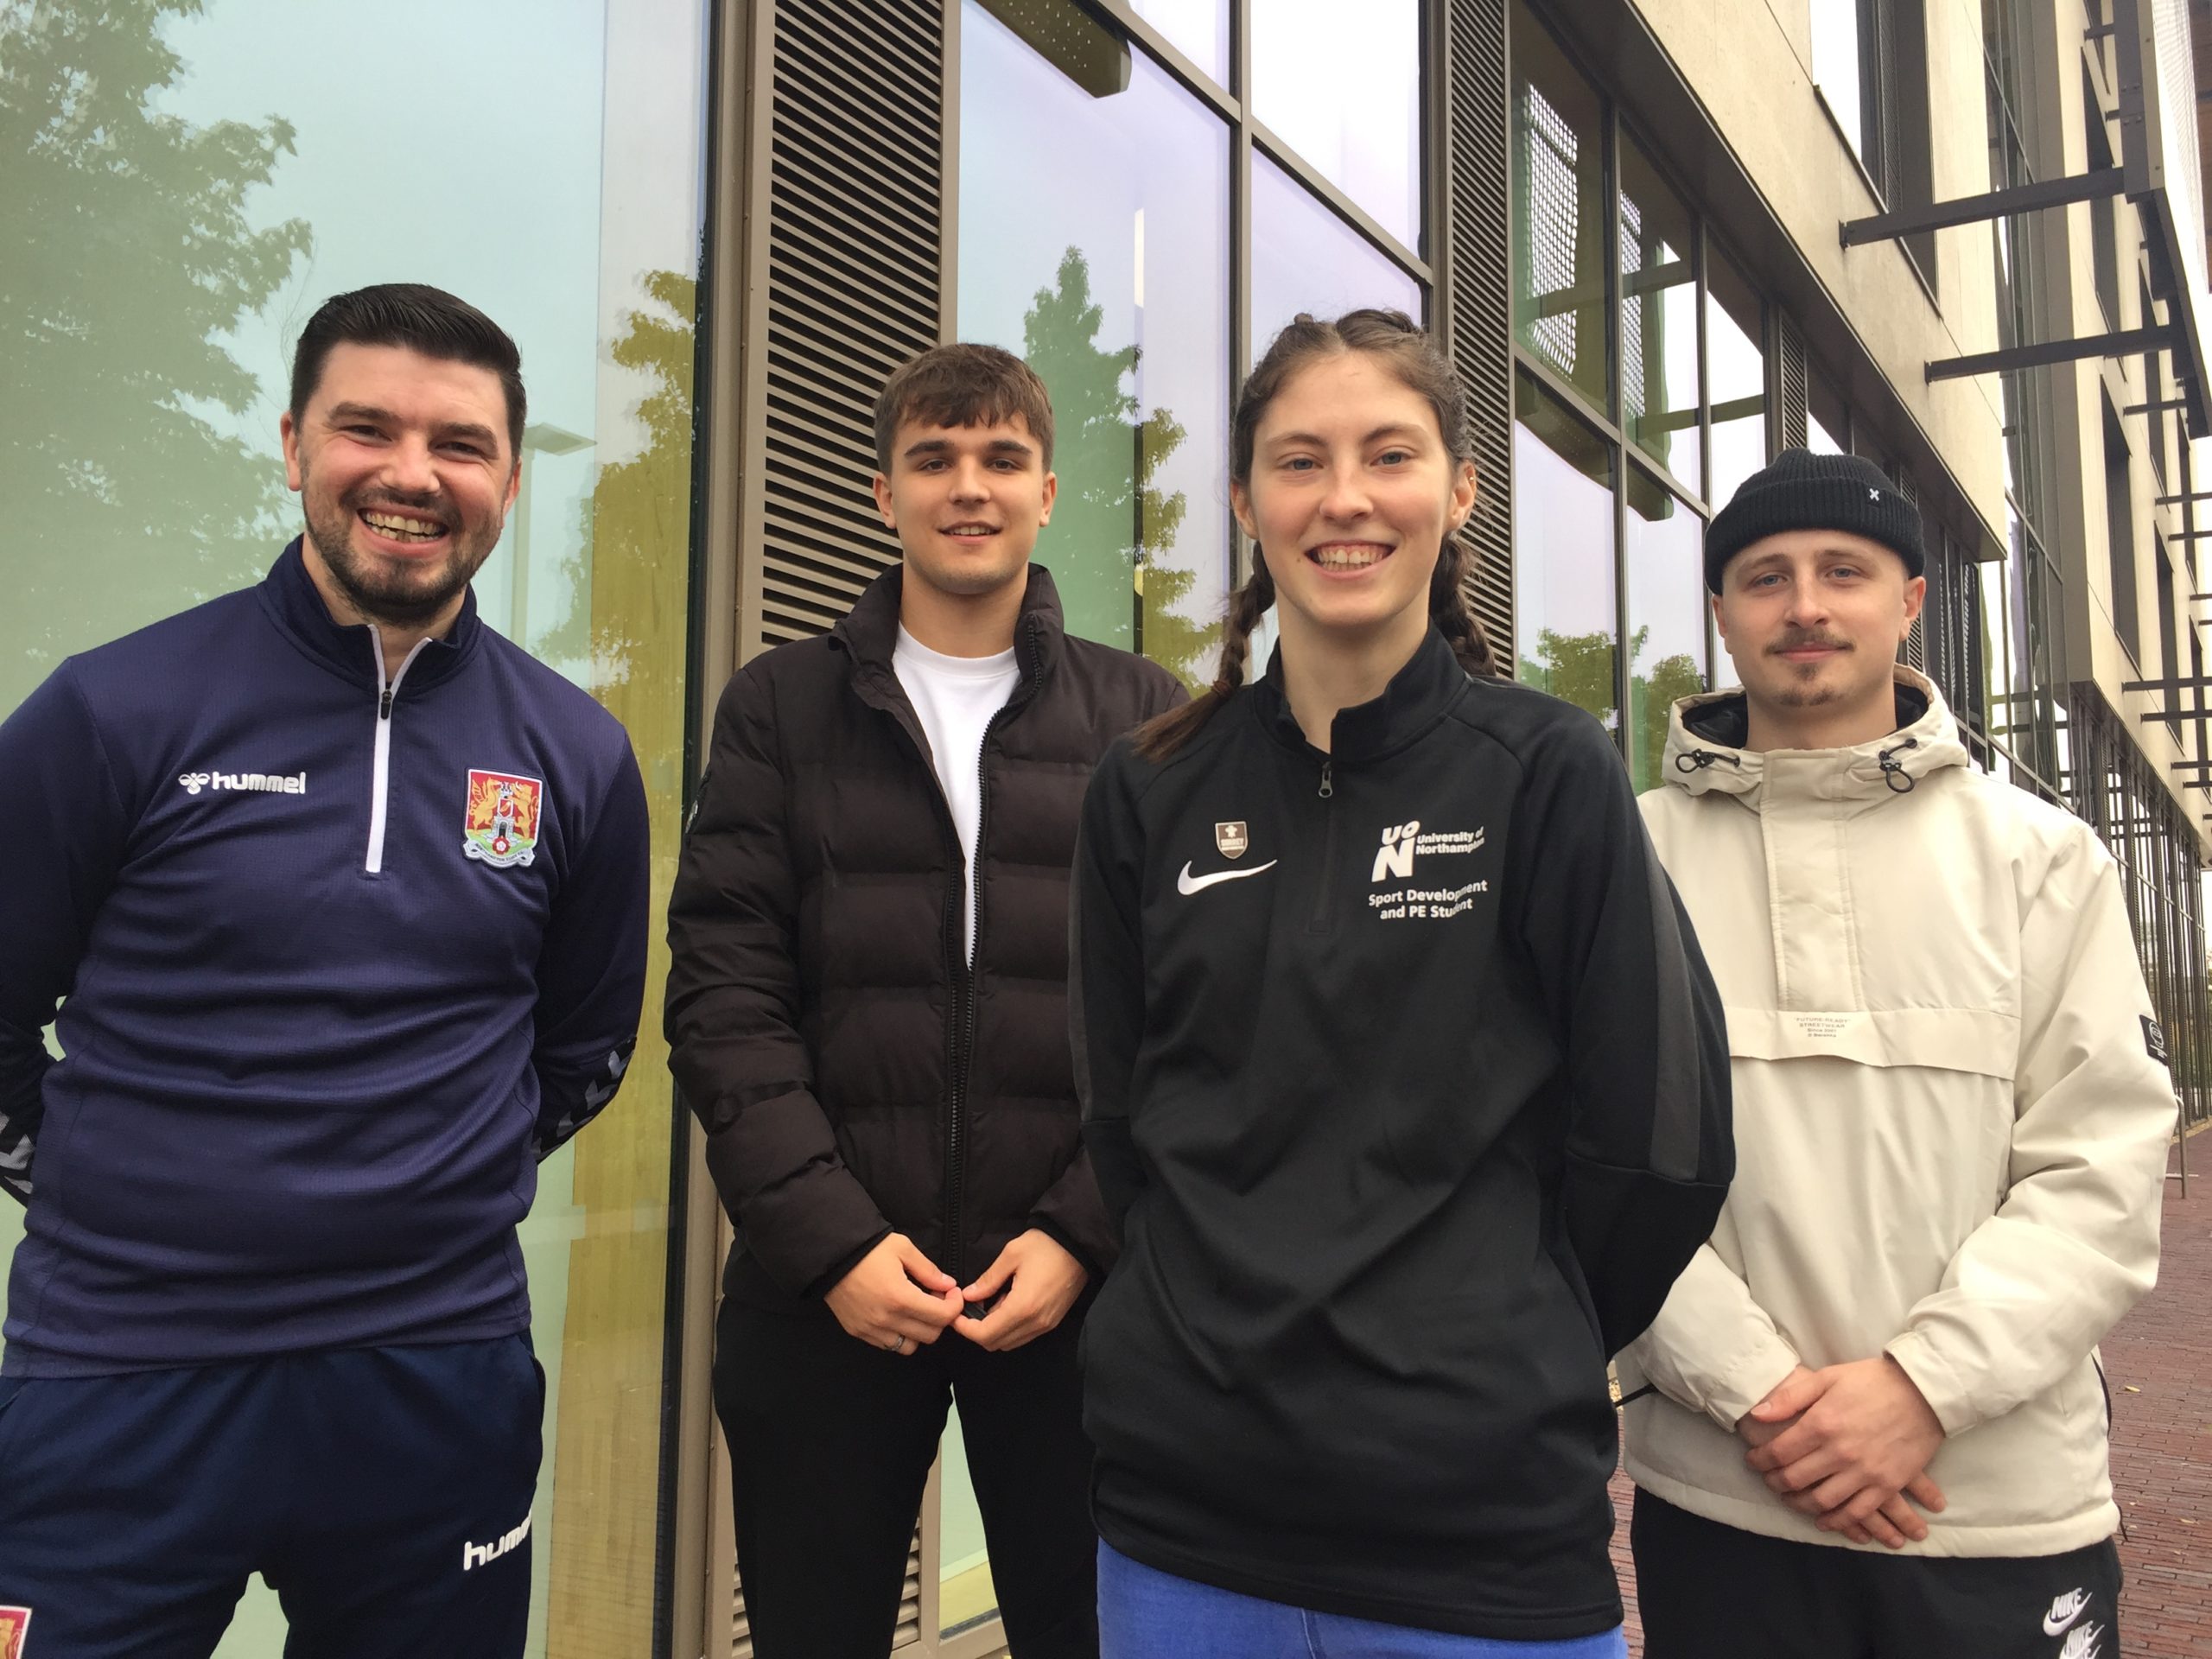 Pictured from left Lucan Burge, Workforce development manager at Northampton Town Community Trust; and students Tom Banks, Rebecca White and Elliot Dawes